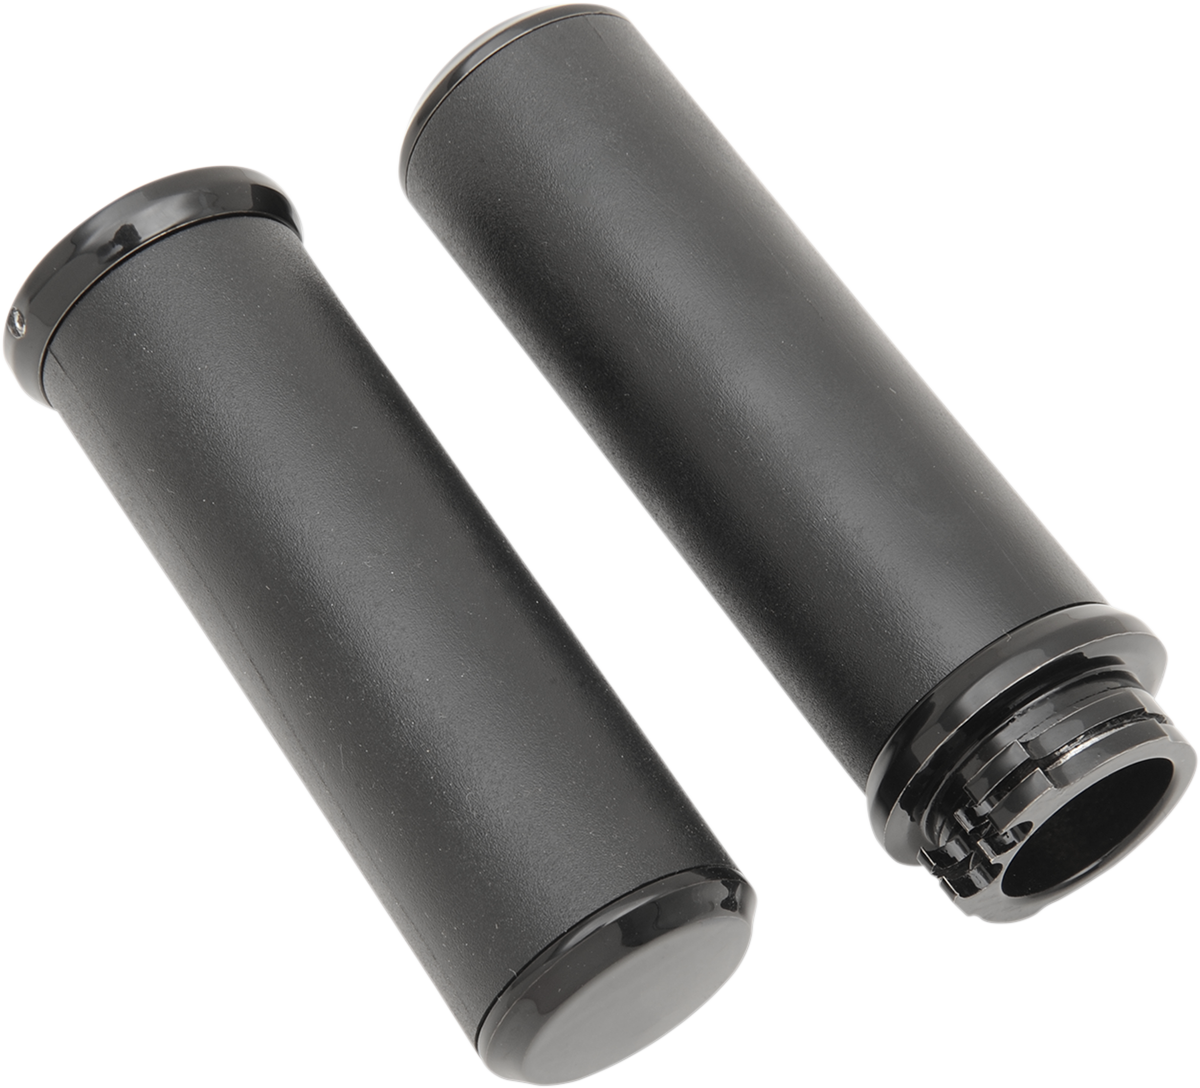 La Choppers Black Comfort Hand Grips 1980-2020 Harley Dyna Touring Softail XL